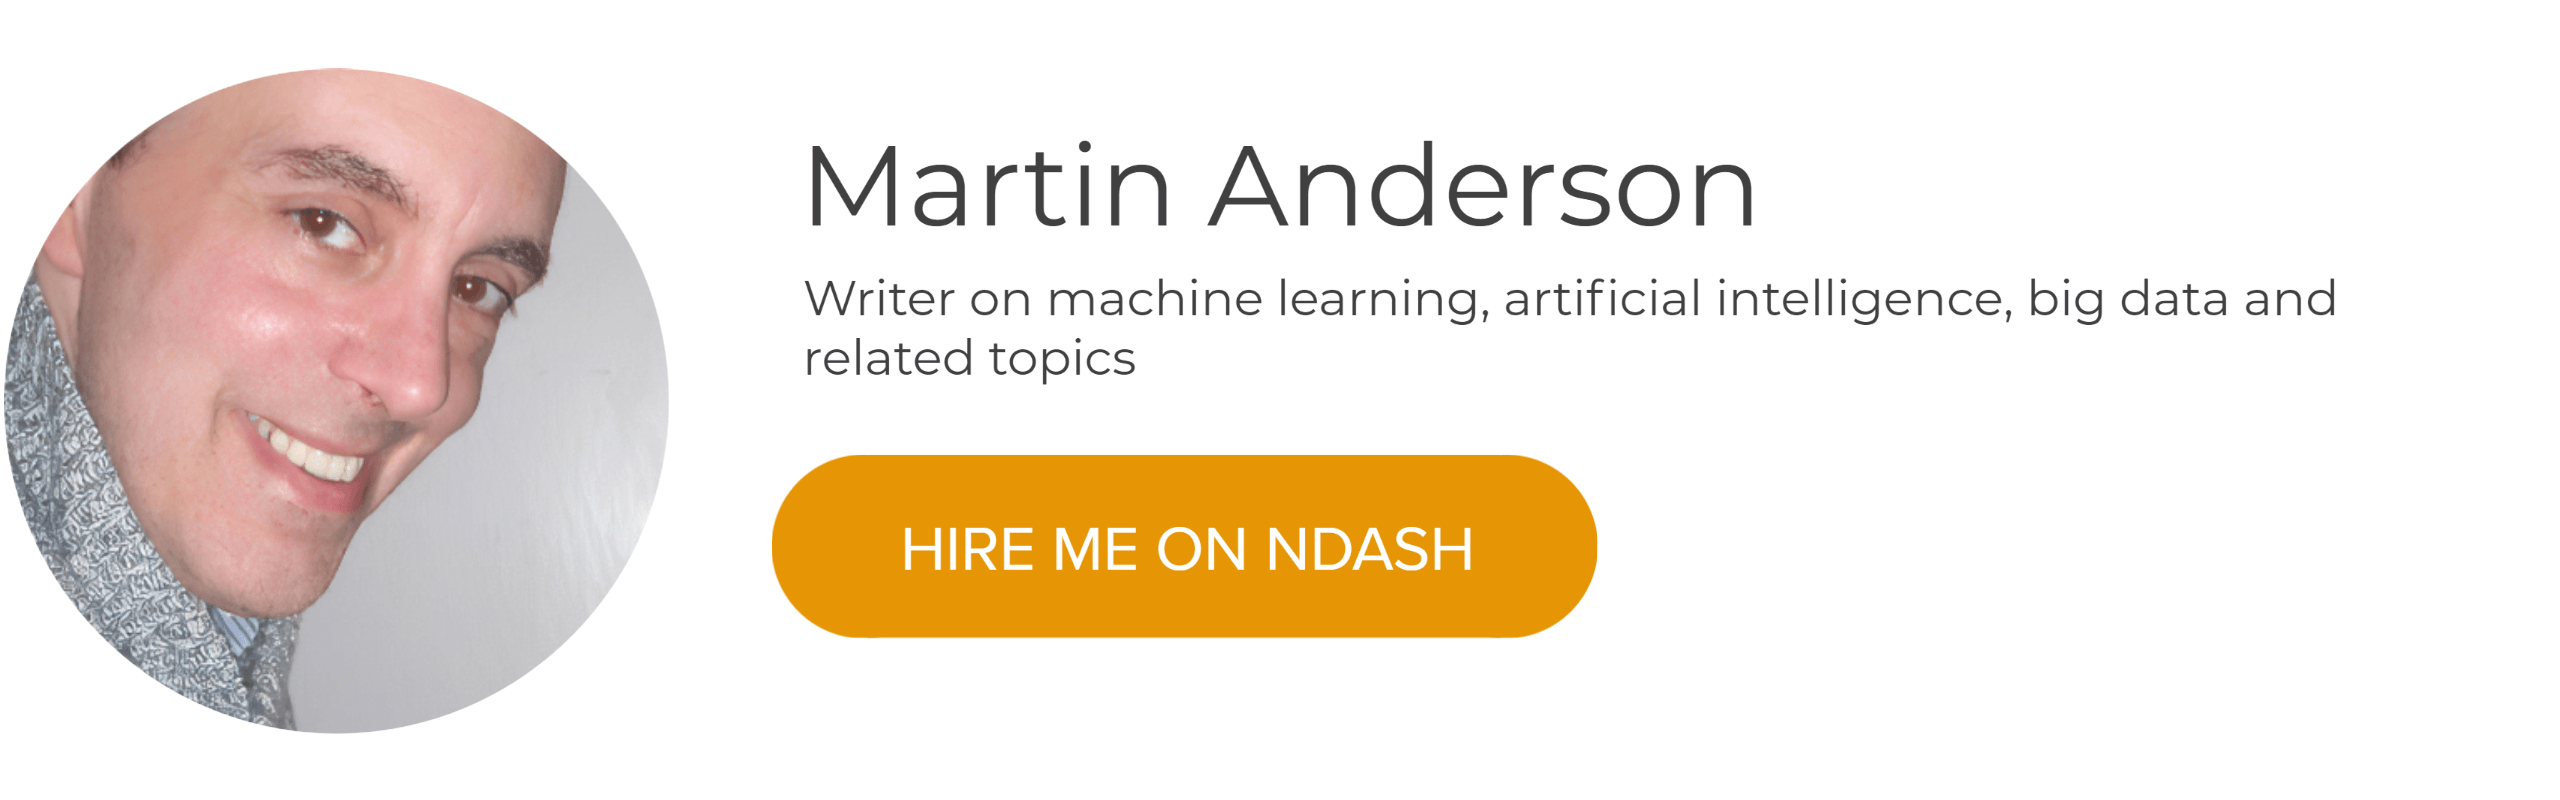 Martin Anderson: Machine Learning, Artificial Intelligence & Big Data